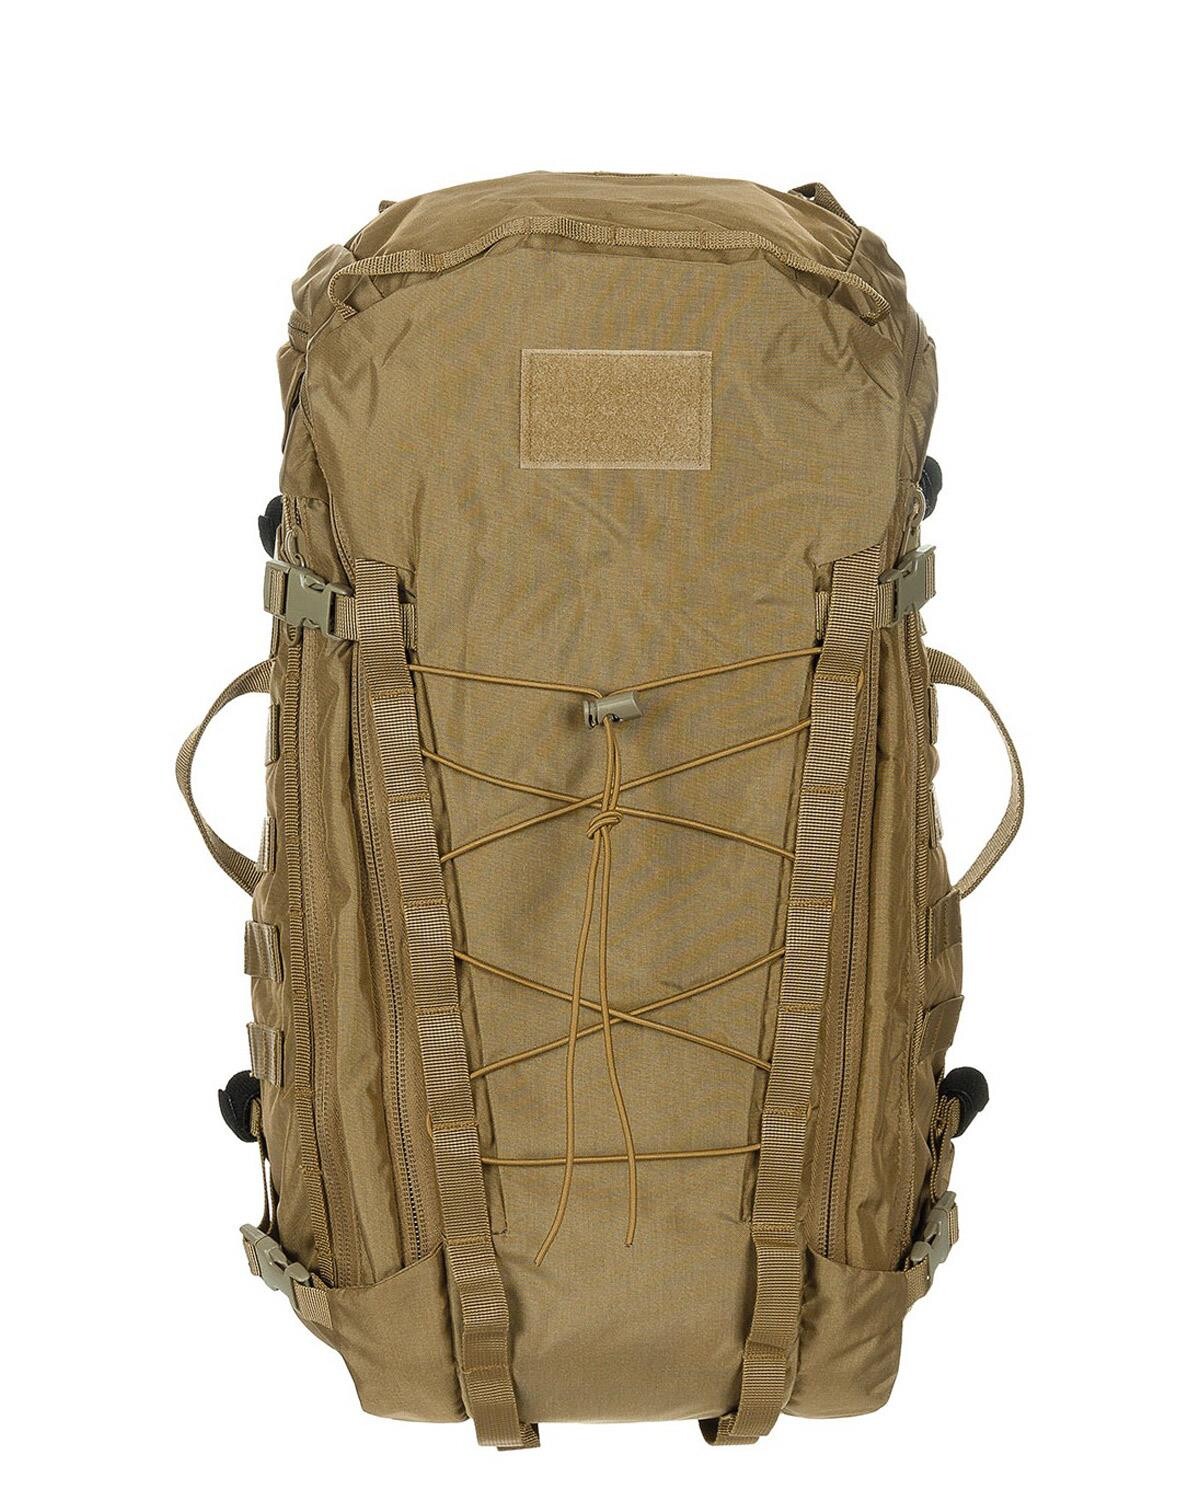 MFH Backpack Mission 30 (Coyote Brun, One Size)